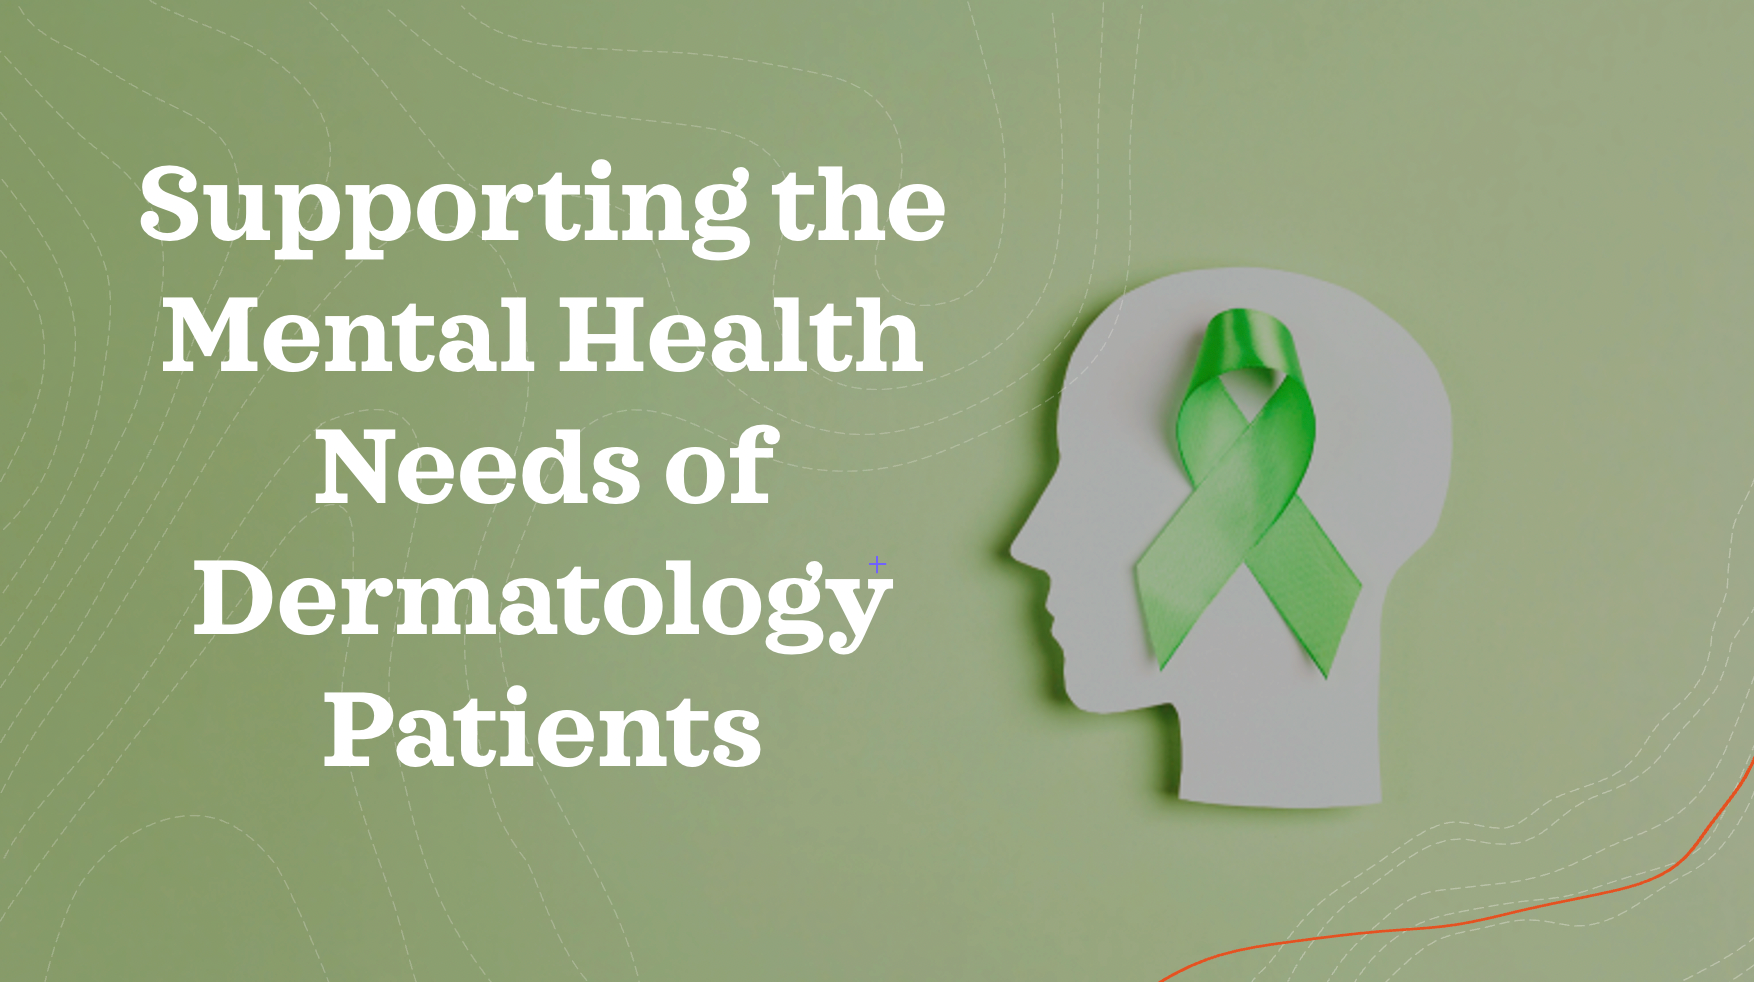 Supporting the Mental Health Needs of Dermatology Patients